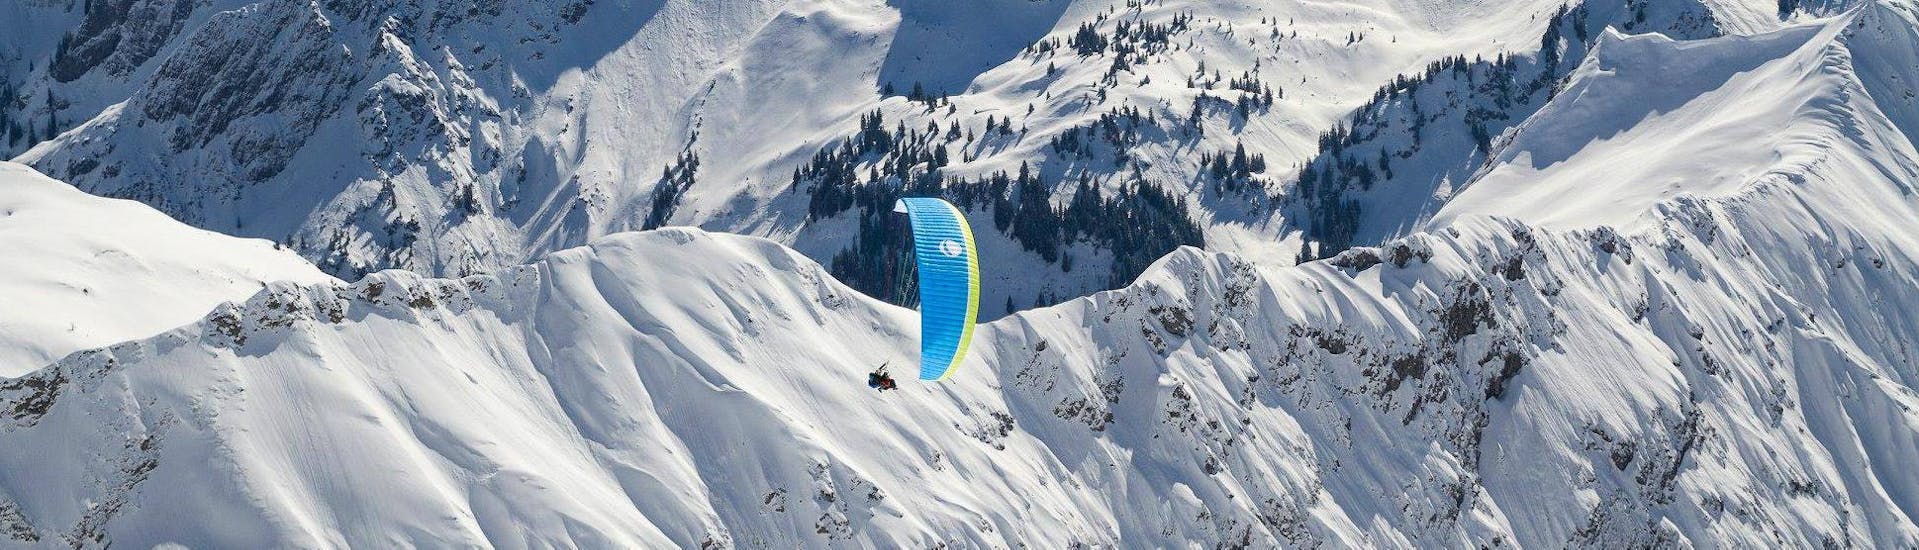 A tandem flying during Tandem Paragliding at Hörnerbahn in Winter - Panorama Plus with vogelfrei Allgäu.